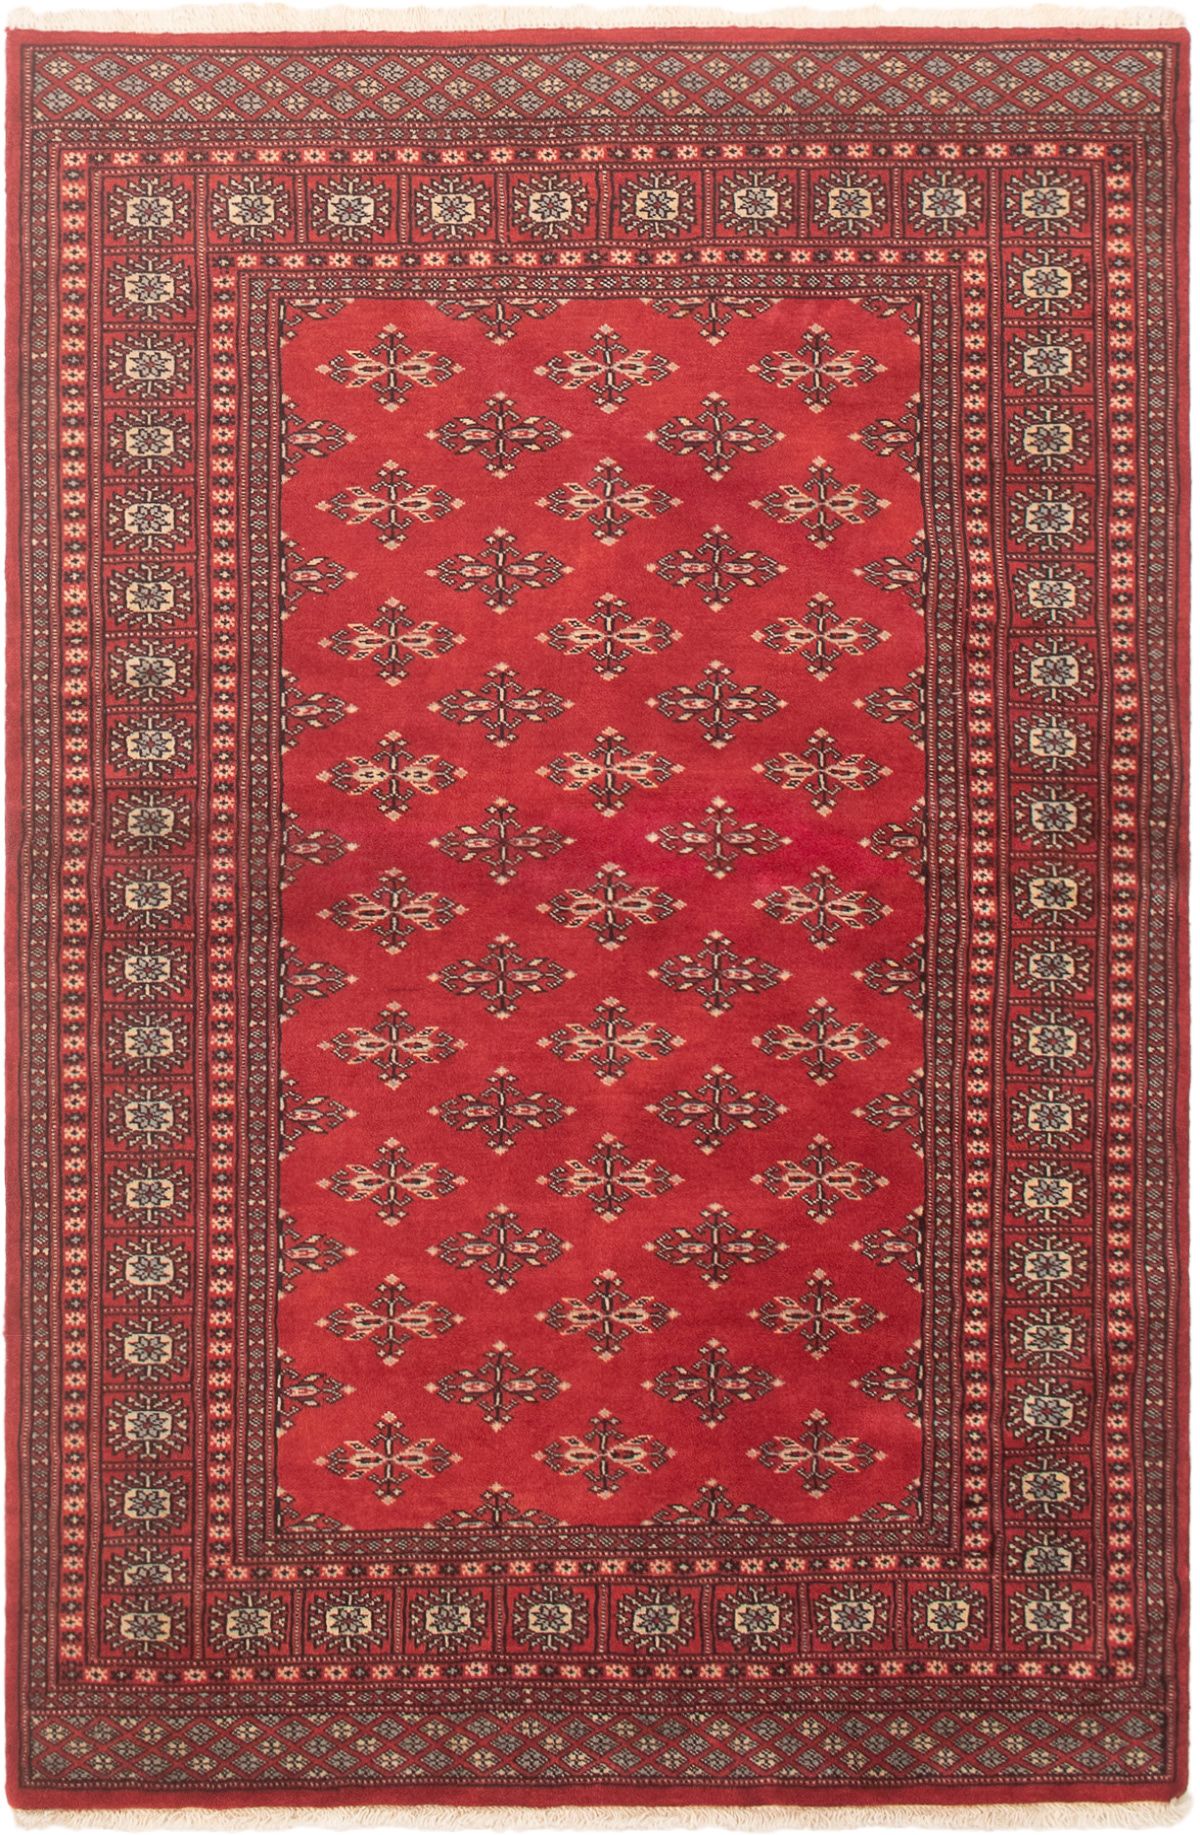 Hand-knotted Finest Peshawar Bokhara Red Wool Rug 4'0" x 6'2"  Size: 4'0" x 6'2"  